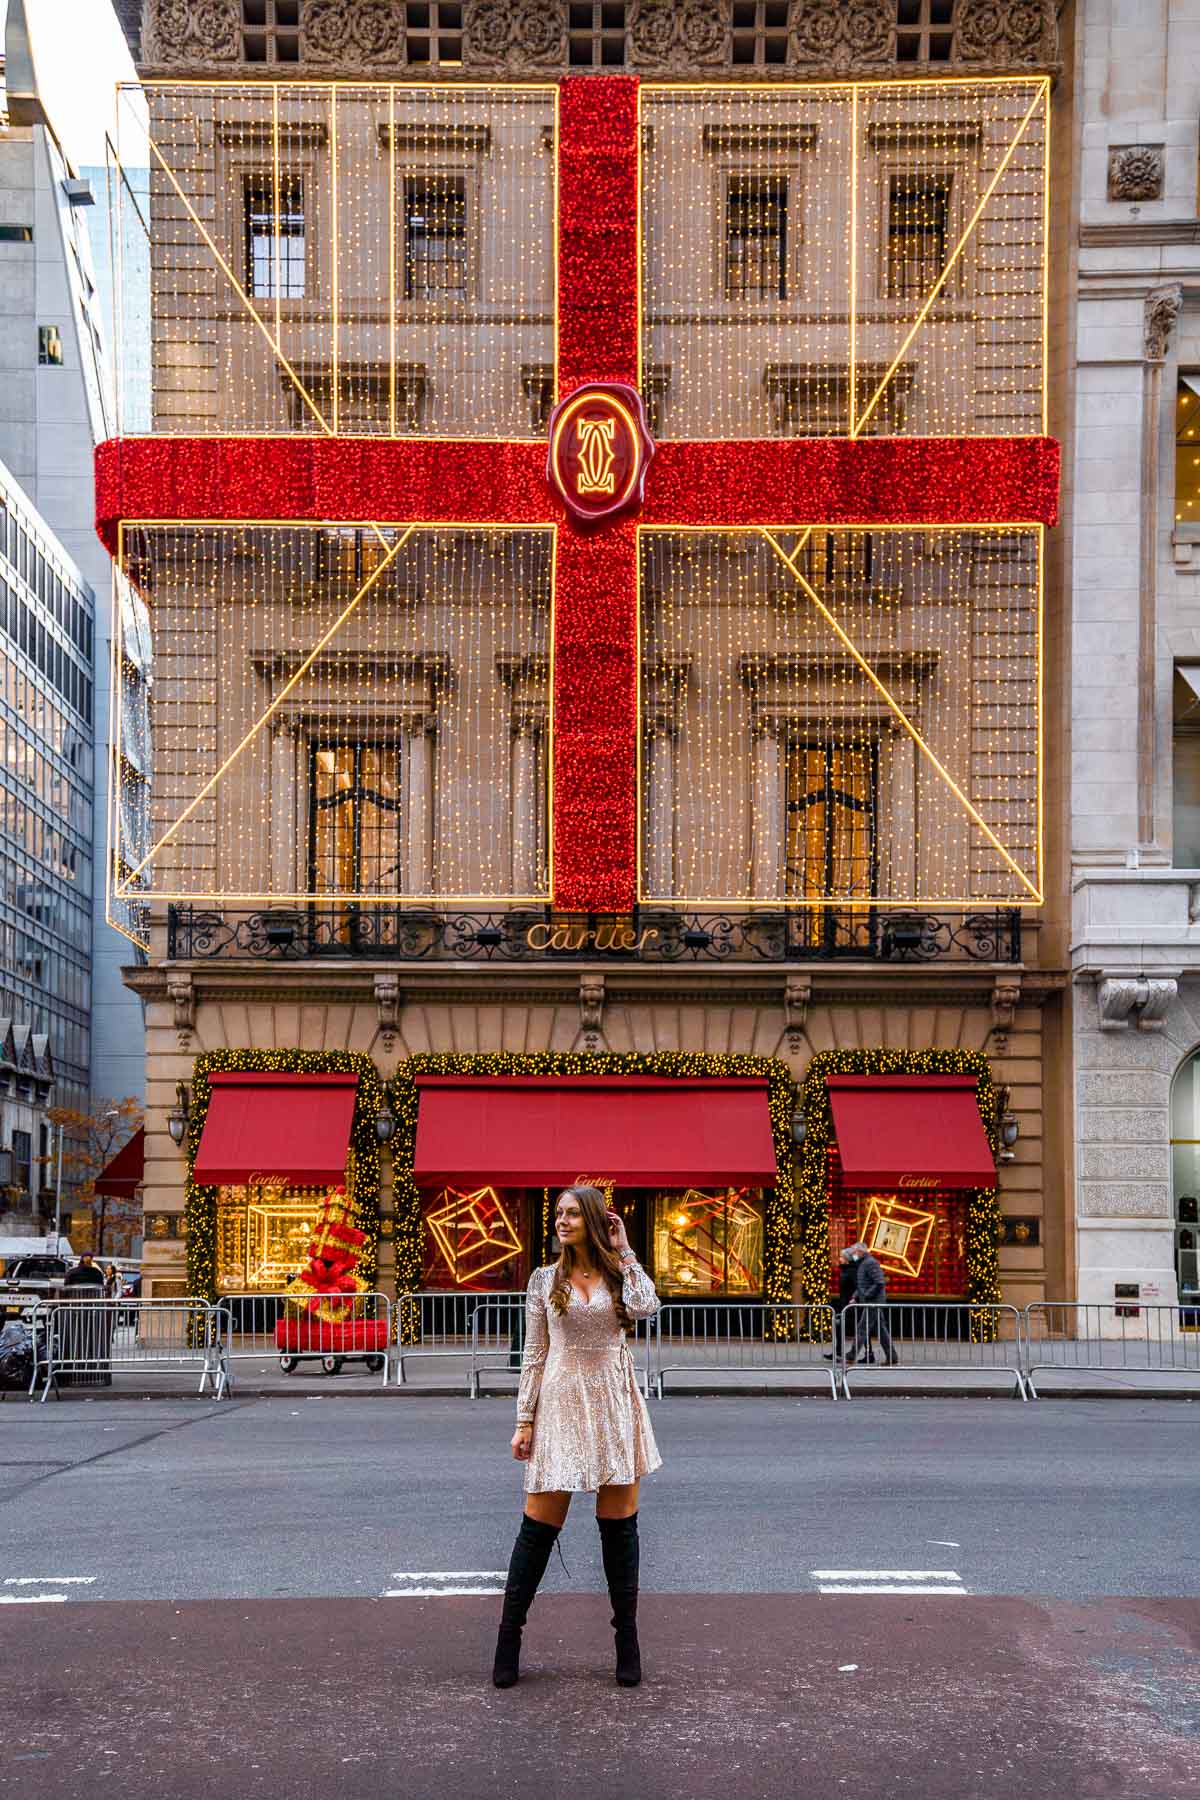 Cartier festive decoration, one of the best NYC Christmas photo spots